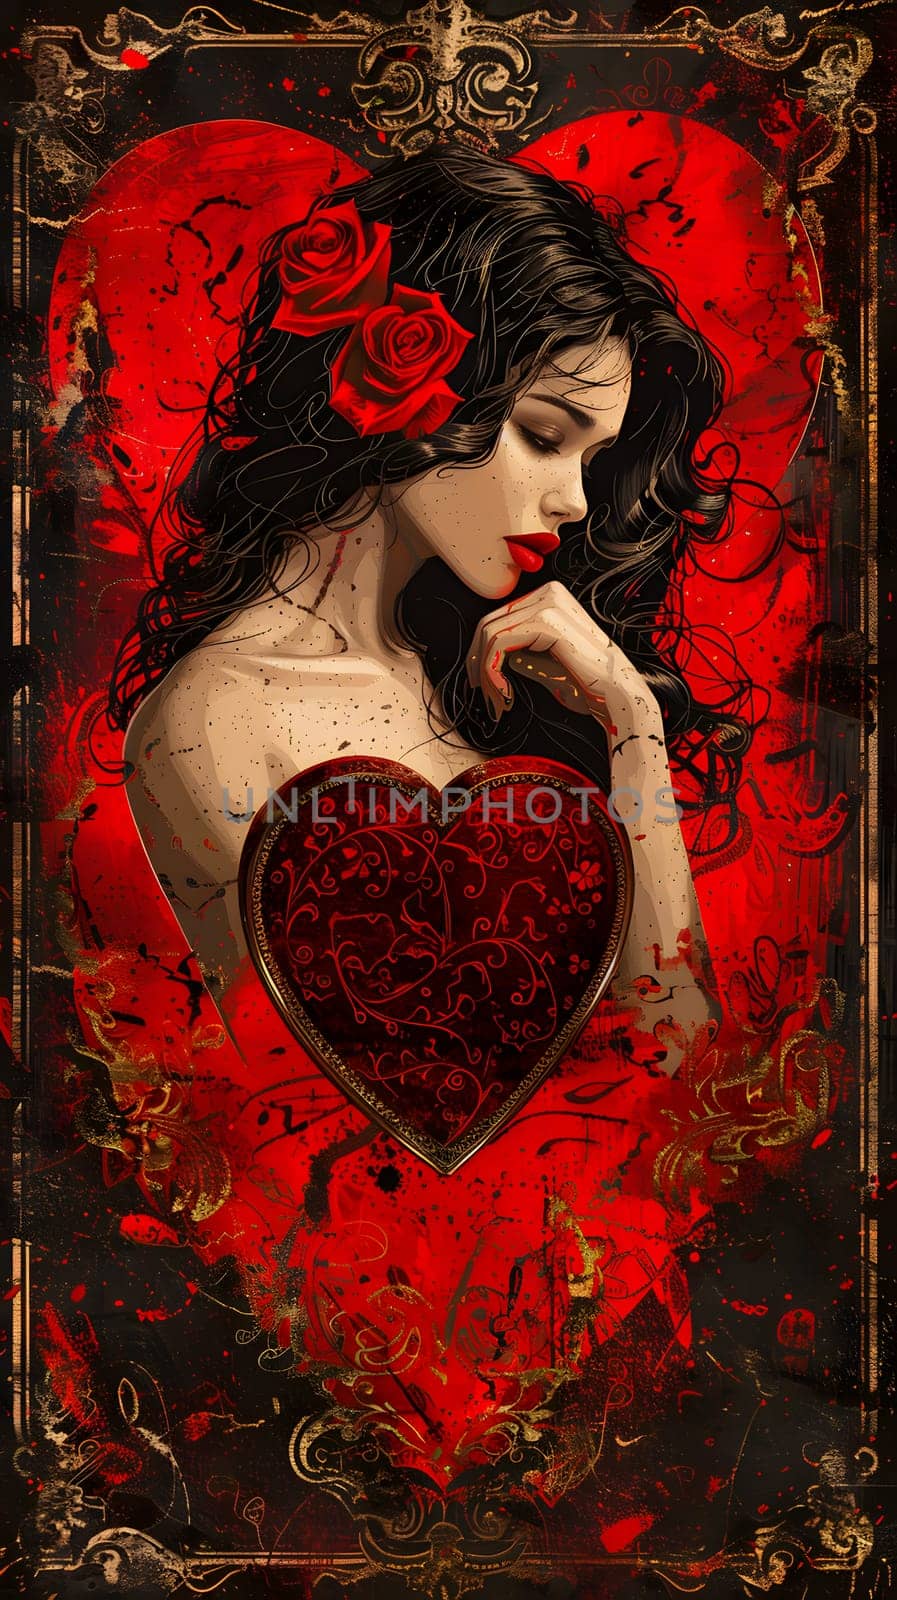 Illustration of a fictional character with roses in her hair holding a red heart by Nadtochiy